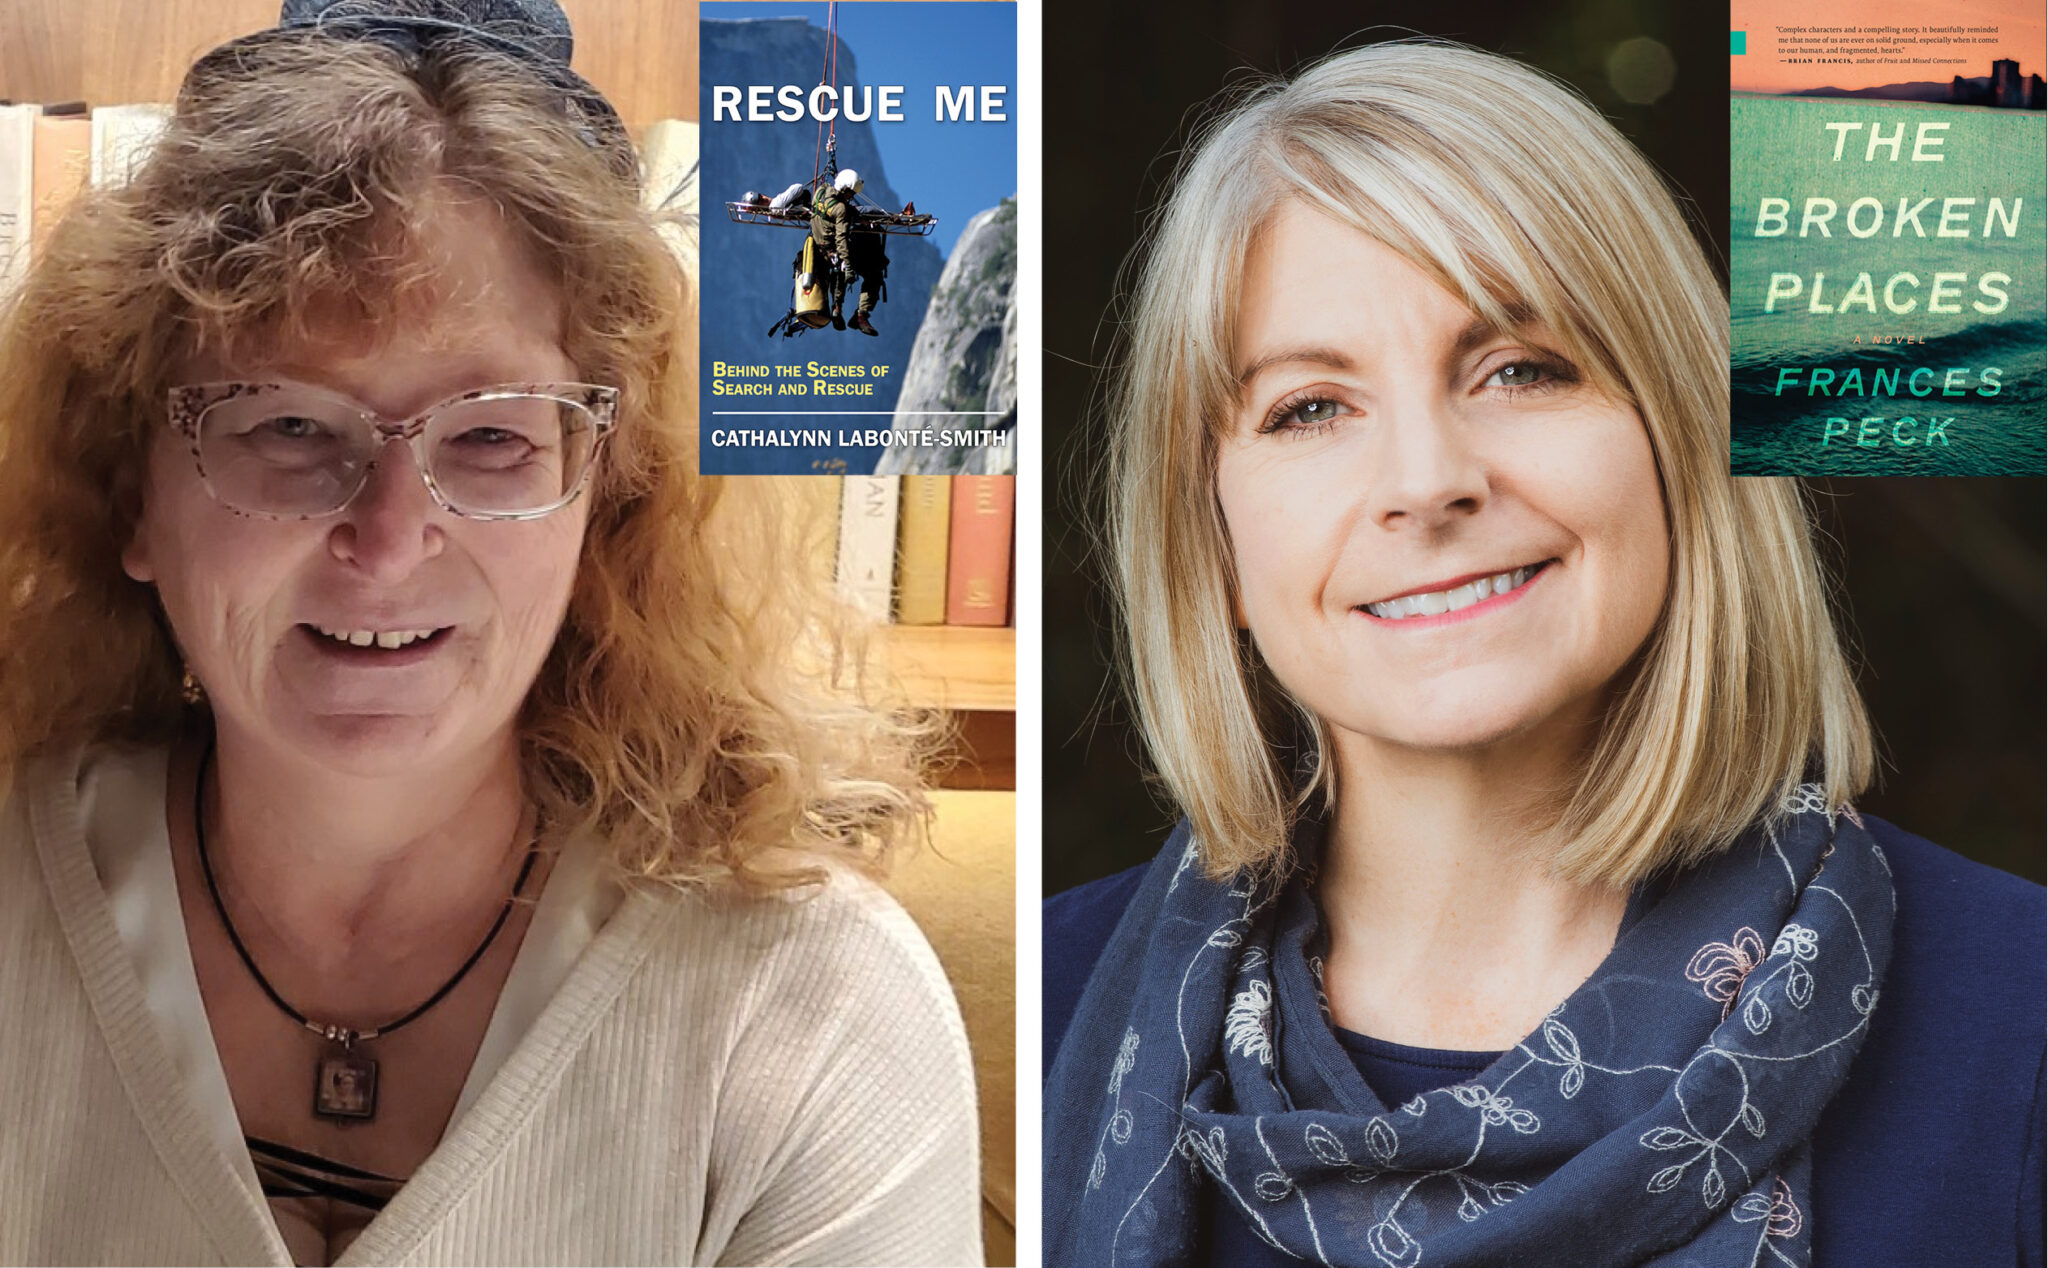 Photo of (left) Cathalynn Labonté-Smith and her nonfiction book "Rescue Me," and (right) Frances Peck and her novel "The Broken Places."